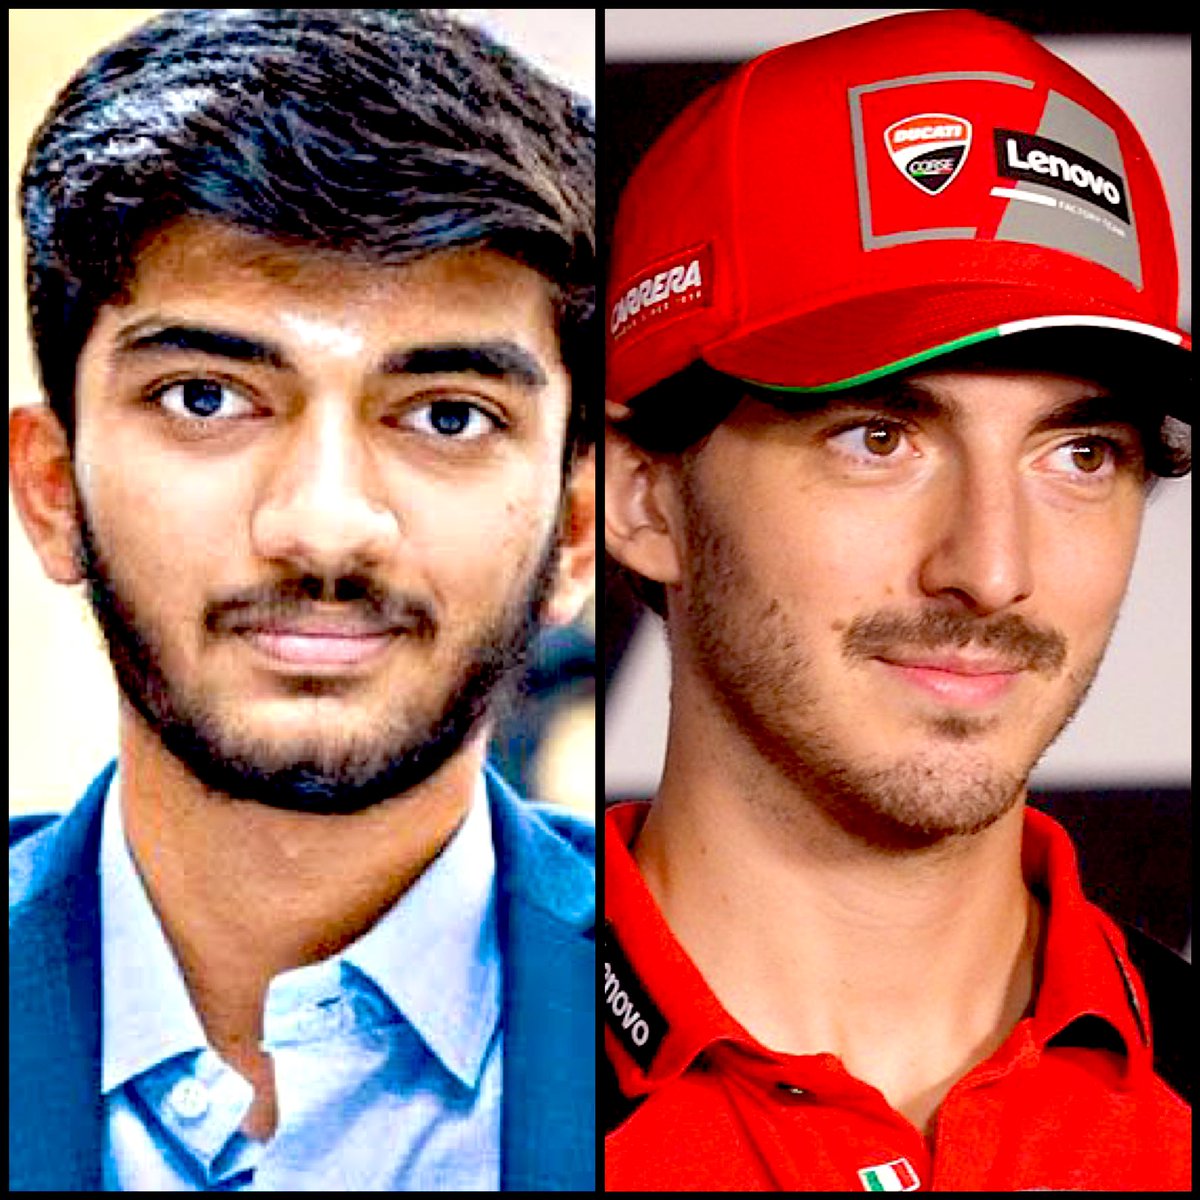 Don’t know why but whenever we see our #India sensation, @DGukesh, we are always reminded of genius, @PeccoBagnaia! Must be the innocence reflecting from their eyes and that calm cool and composed demeanour! #DGukesh #PeccoBagnaia #FIDECandidates #SpanishGP #Chess @FIDE_chess…